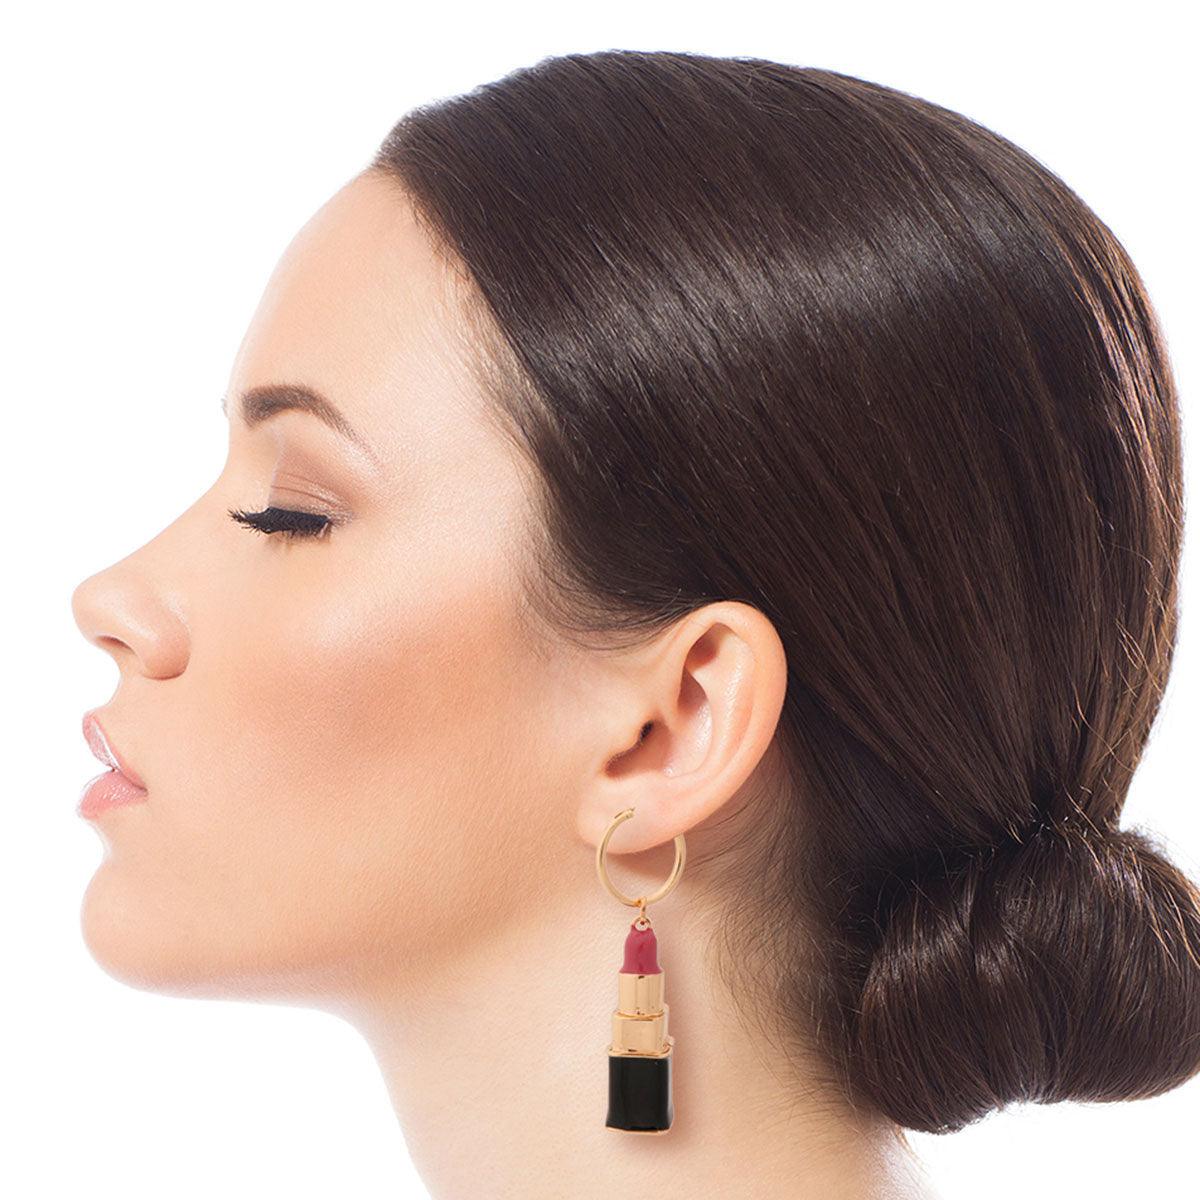 Get Noticed with Pink Lipstick and Gold Hoops | Whimsical Earrings for Any Occasion